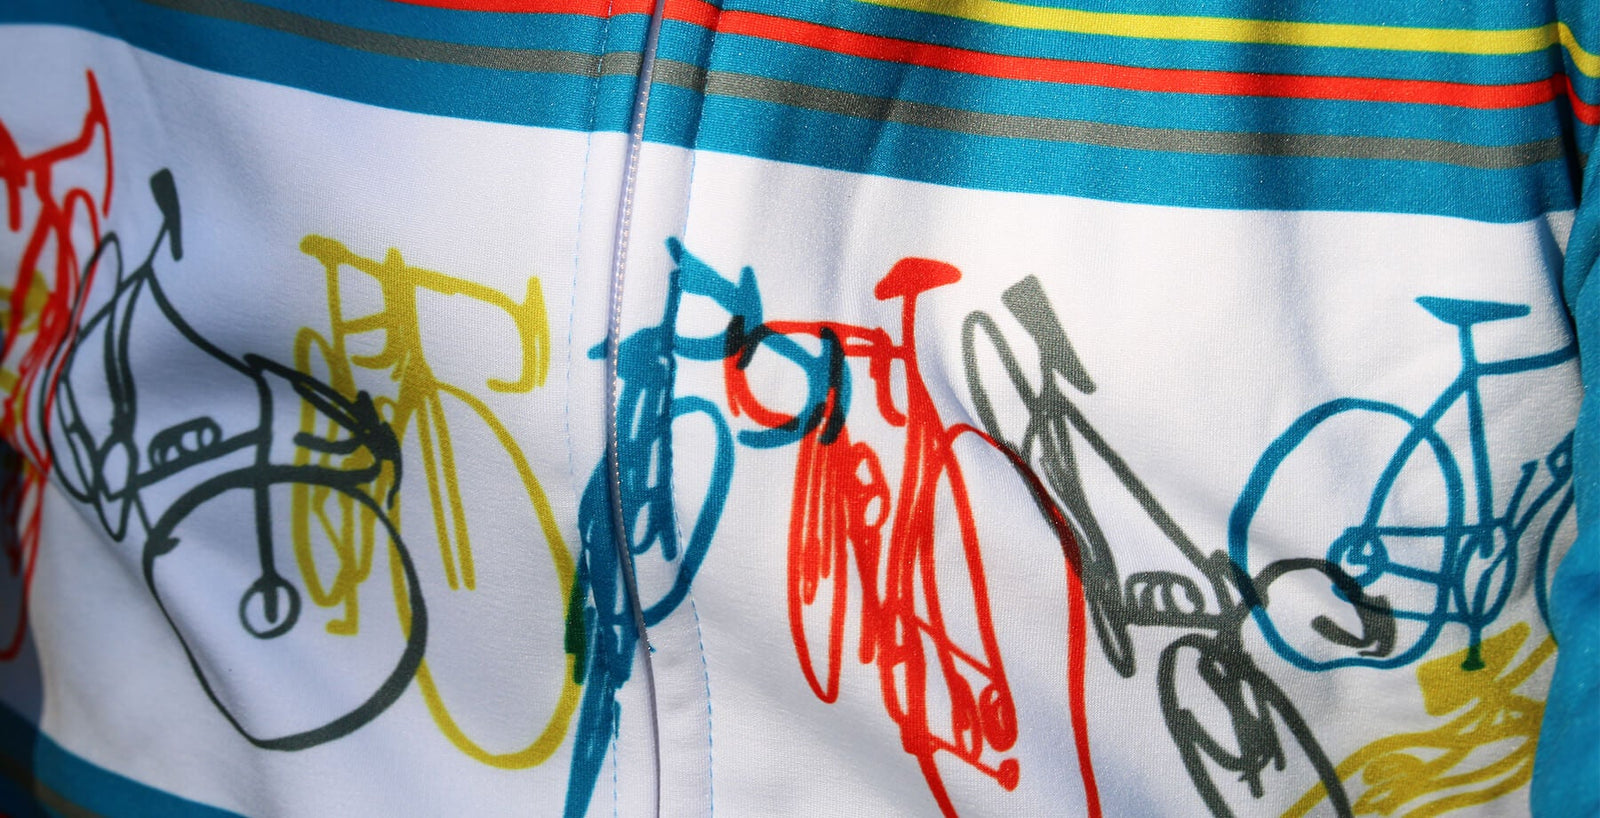 Our New Contender x Espinosa Bicicleta Jersey is All About Air Quality